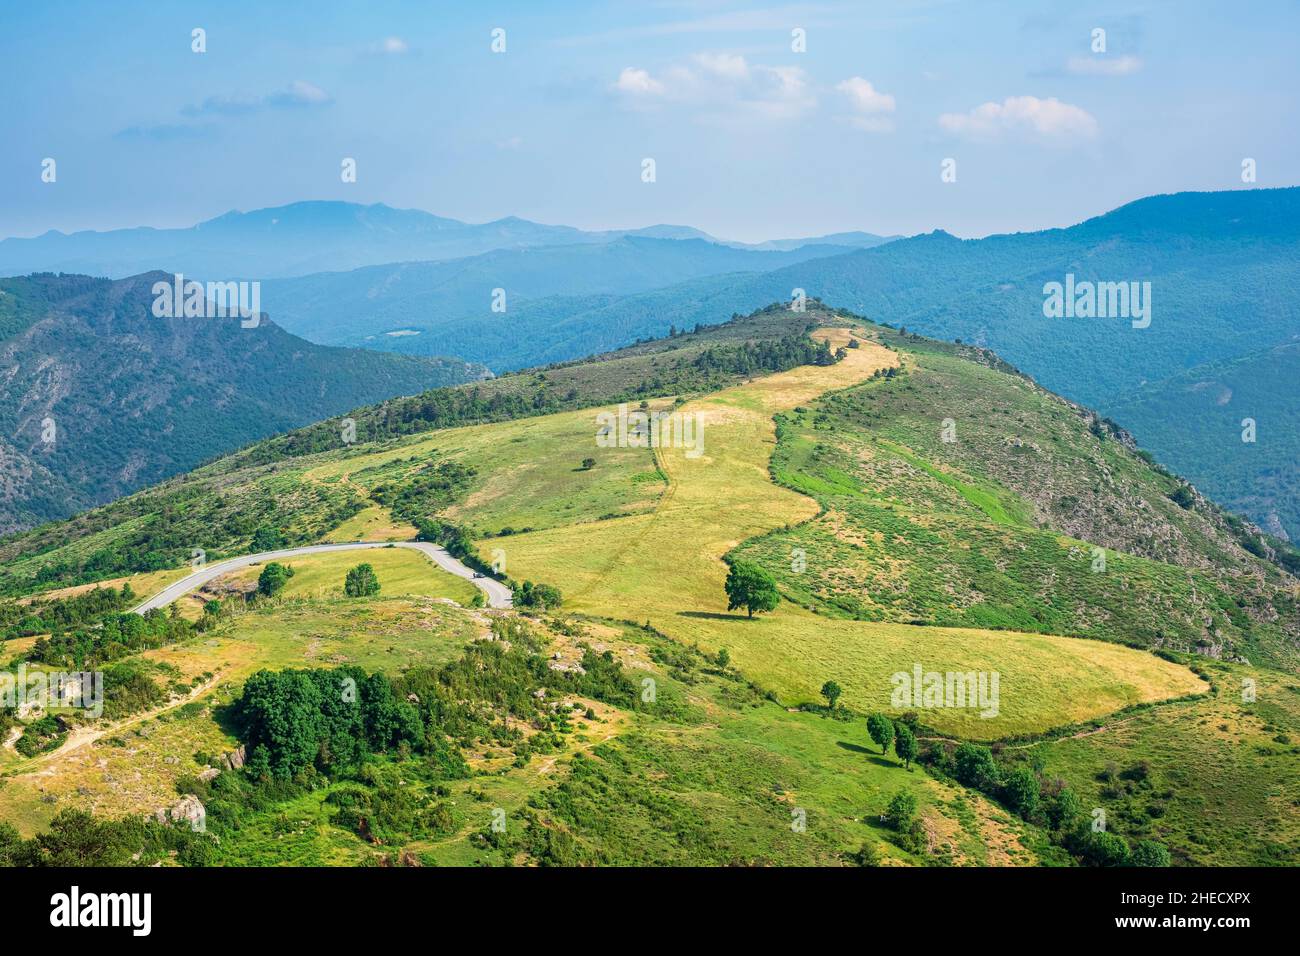 France, Lozere, Corniche des Cevennes, former Royal road from Nimes to Saint-Flour, Aultre field in the surroundings of Le Pompidou village Stock Photo